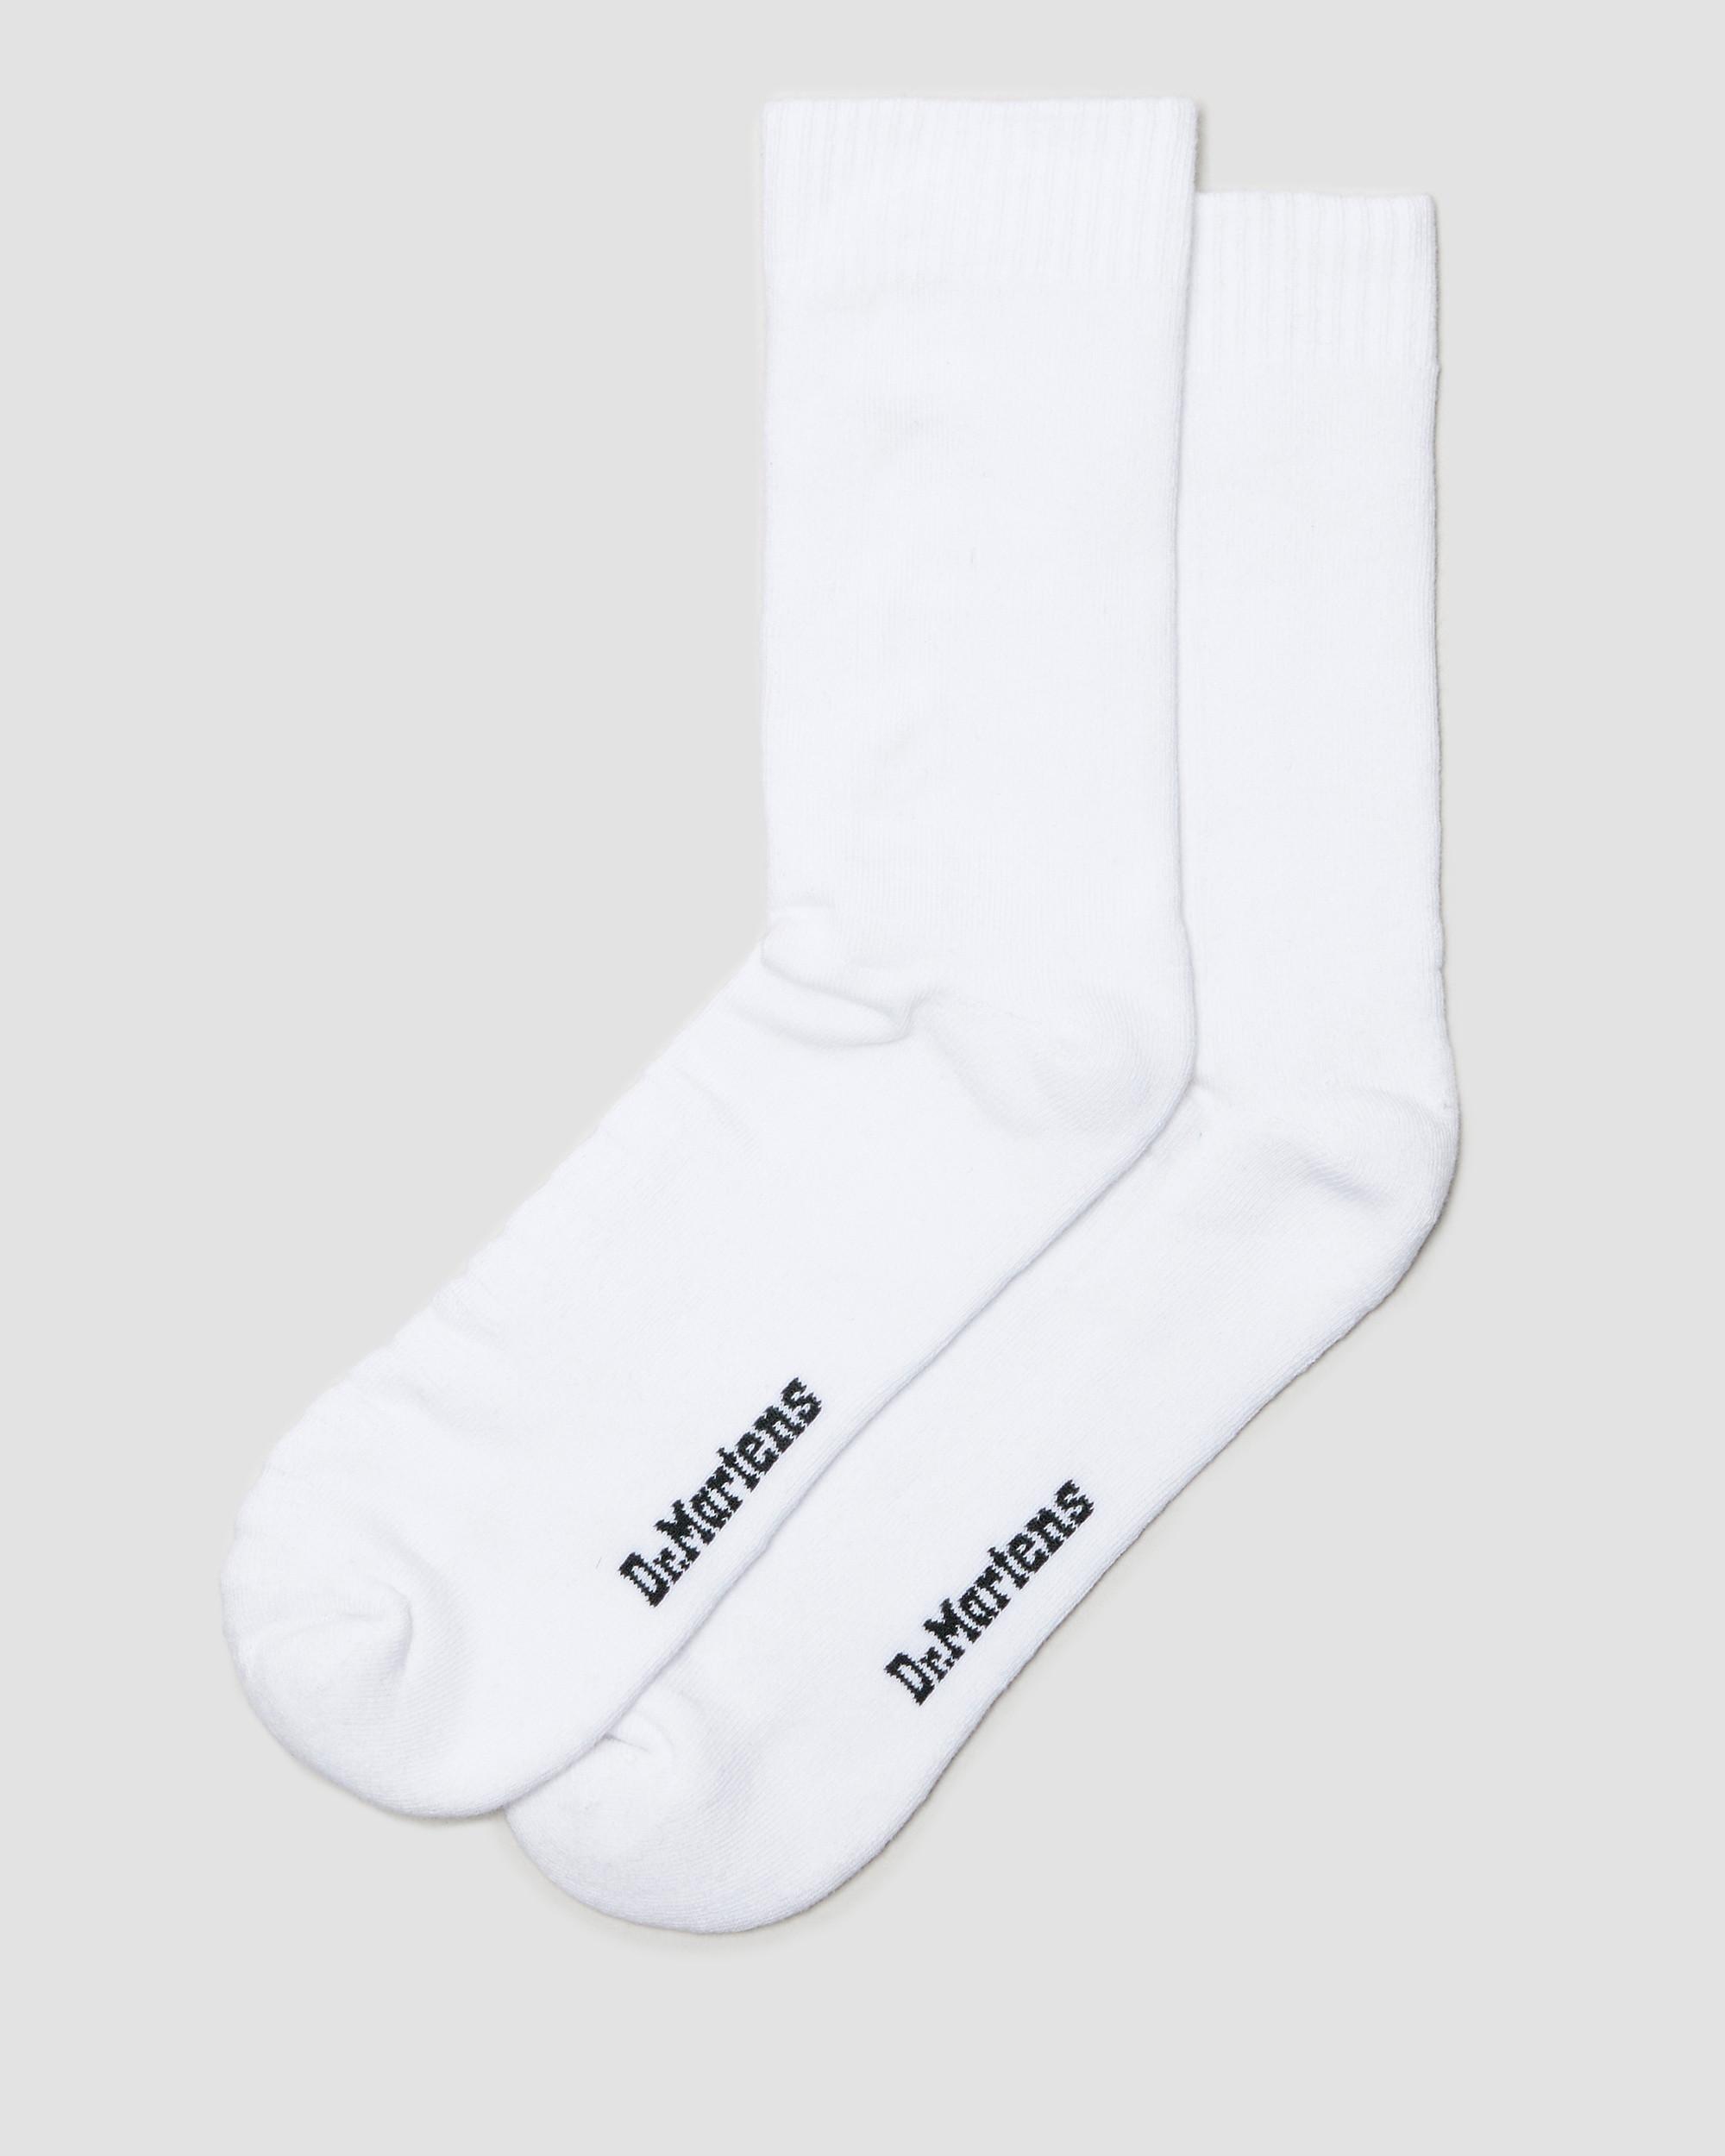 Double Doc Cotton Blend Socks in Yellow+Black